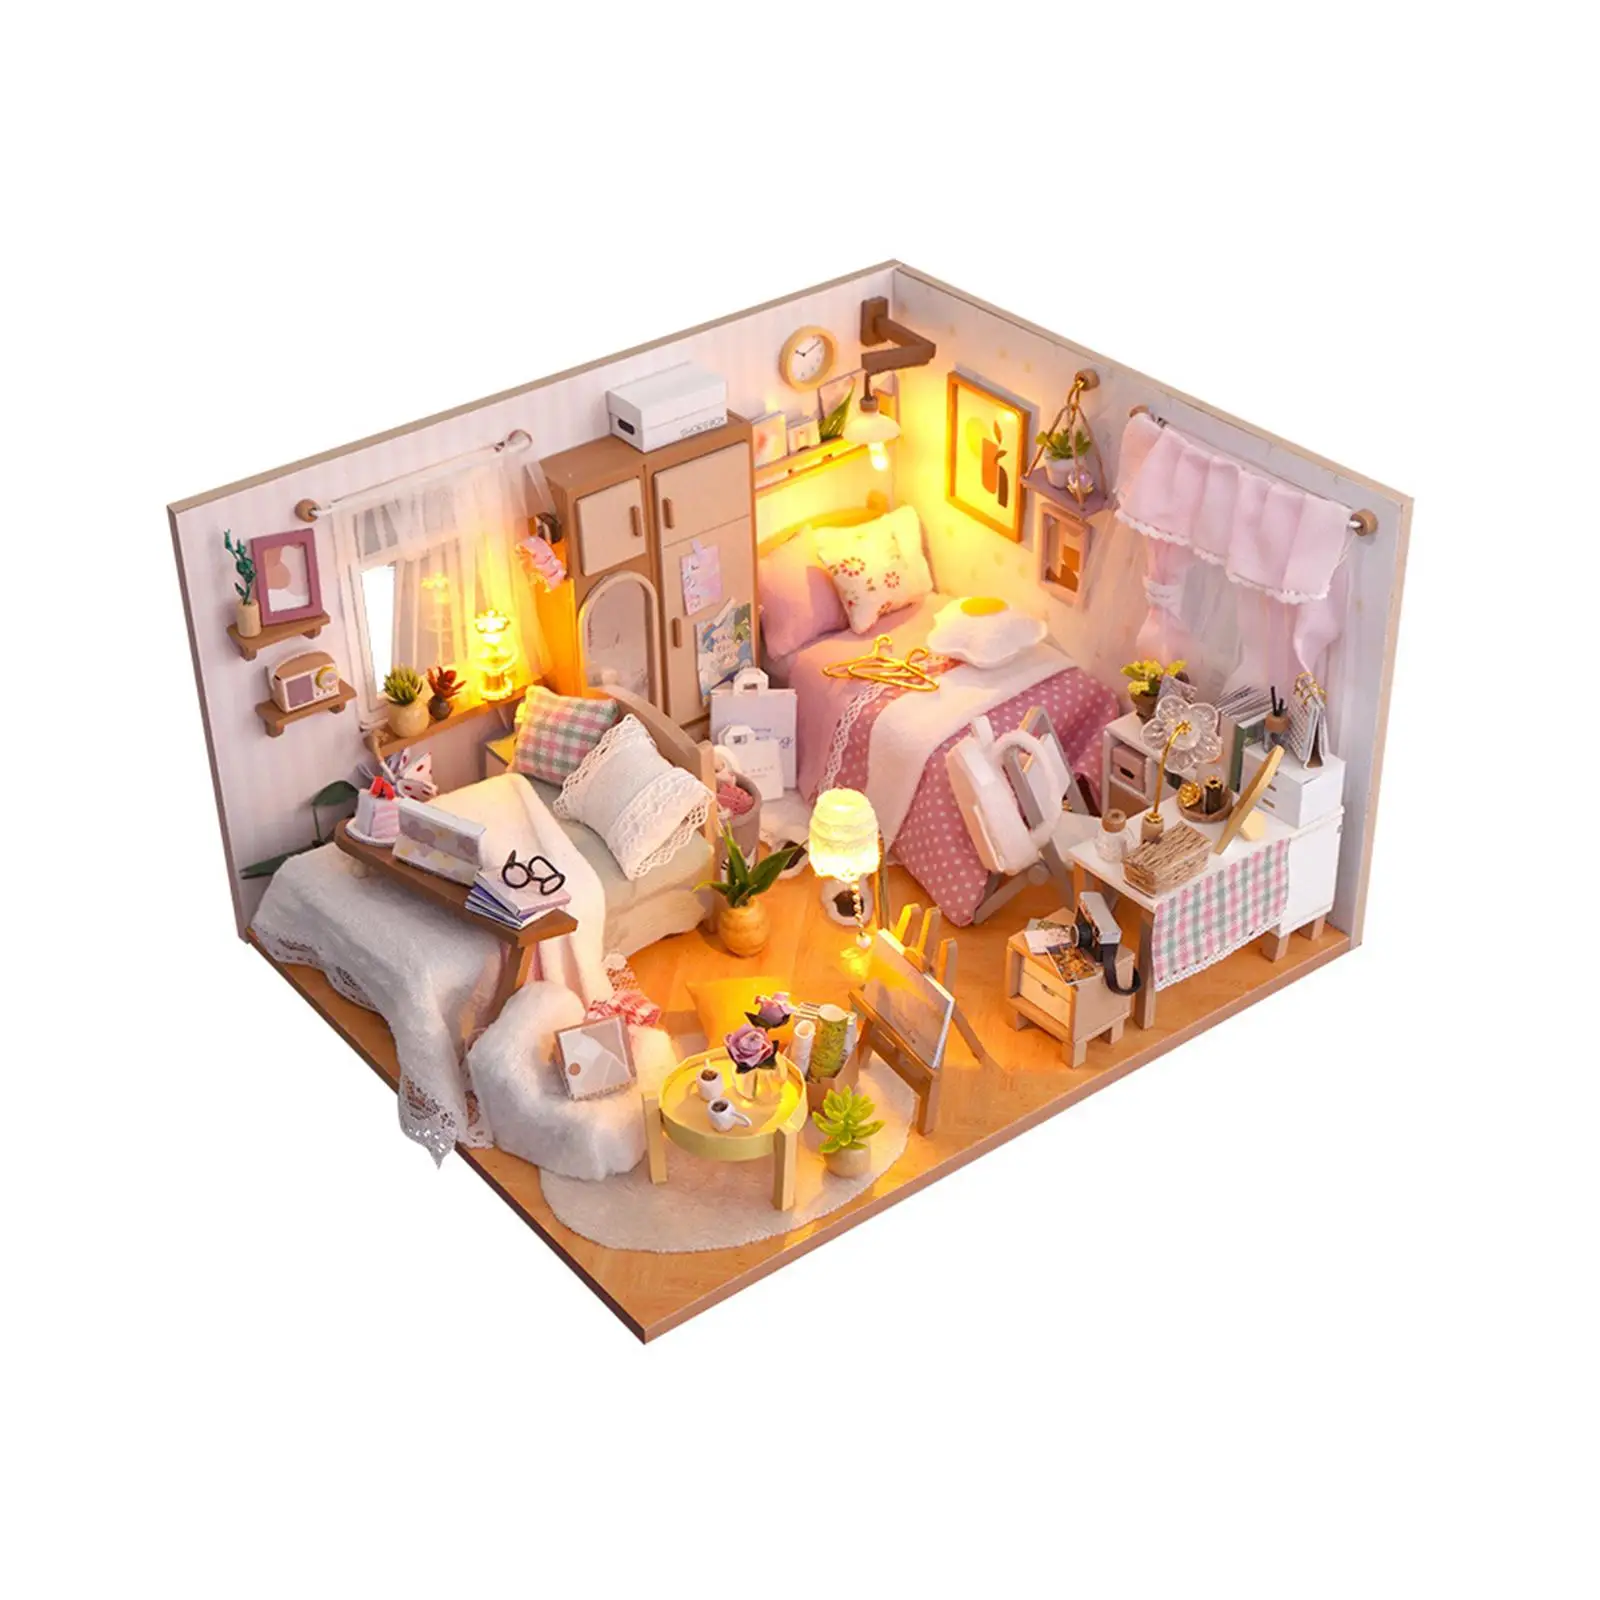 Wooden Miniature Dollhouse Kits with Lights for Boys Girls Creative Bedroom